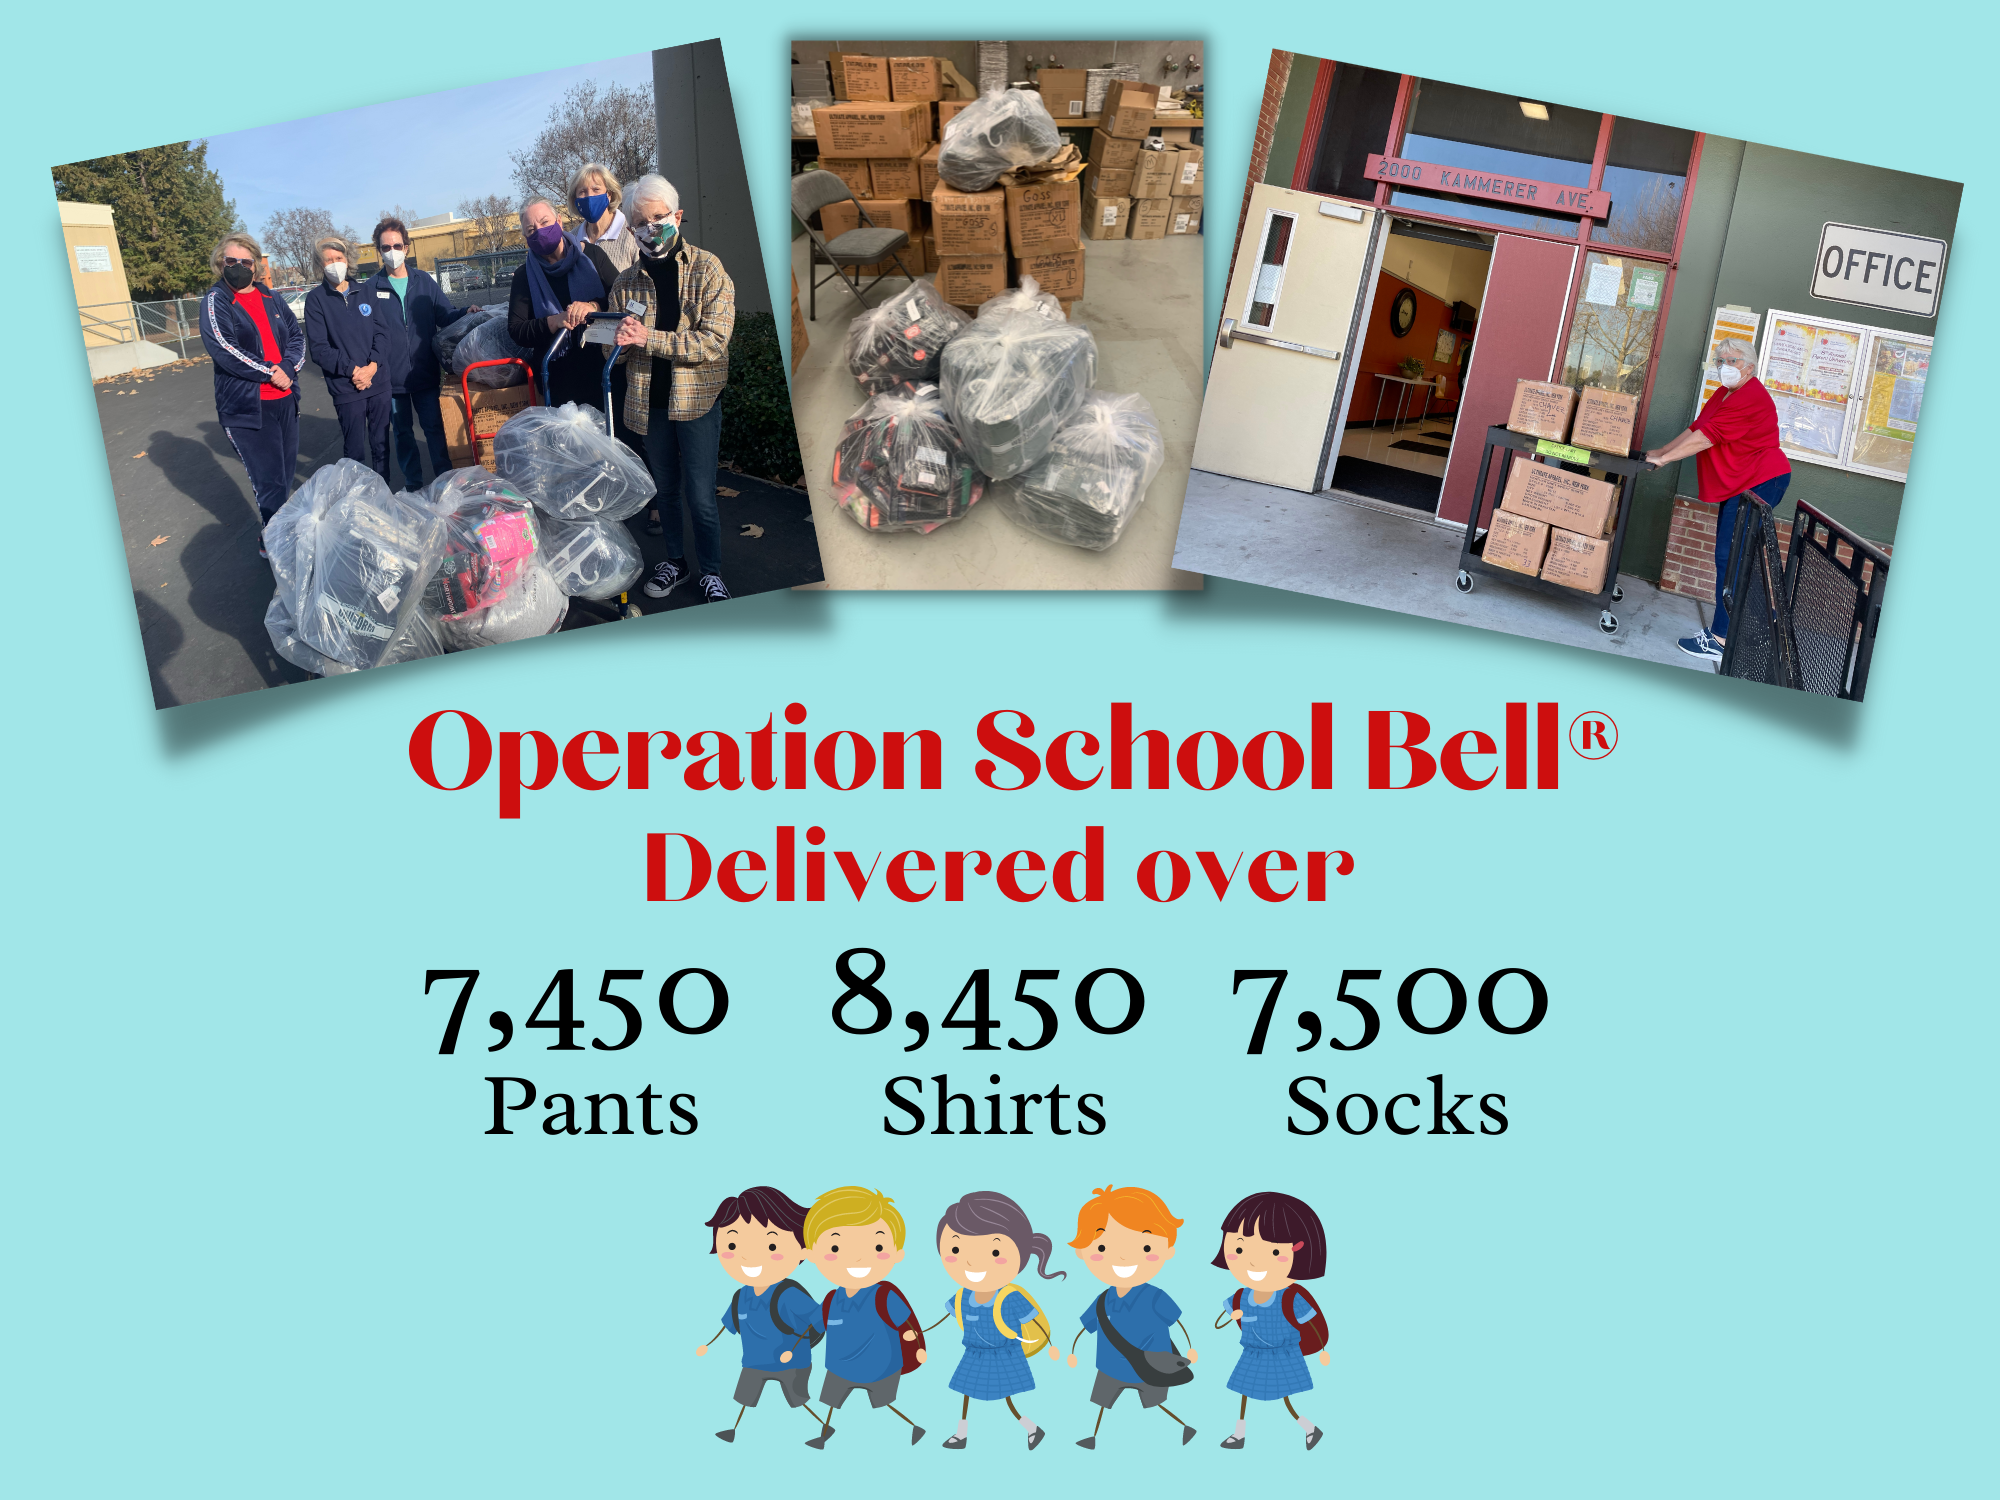 Operation School Bell Delivers More New Clothing